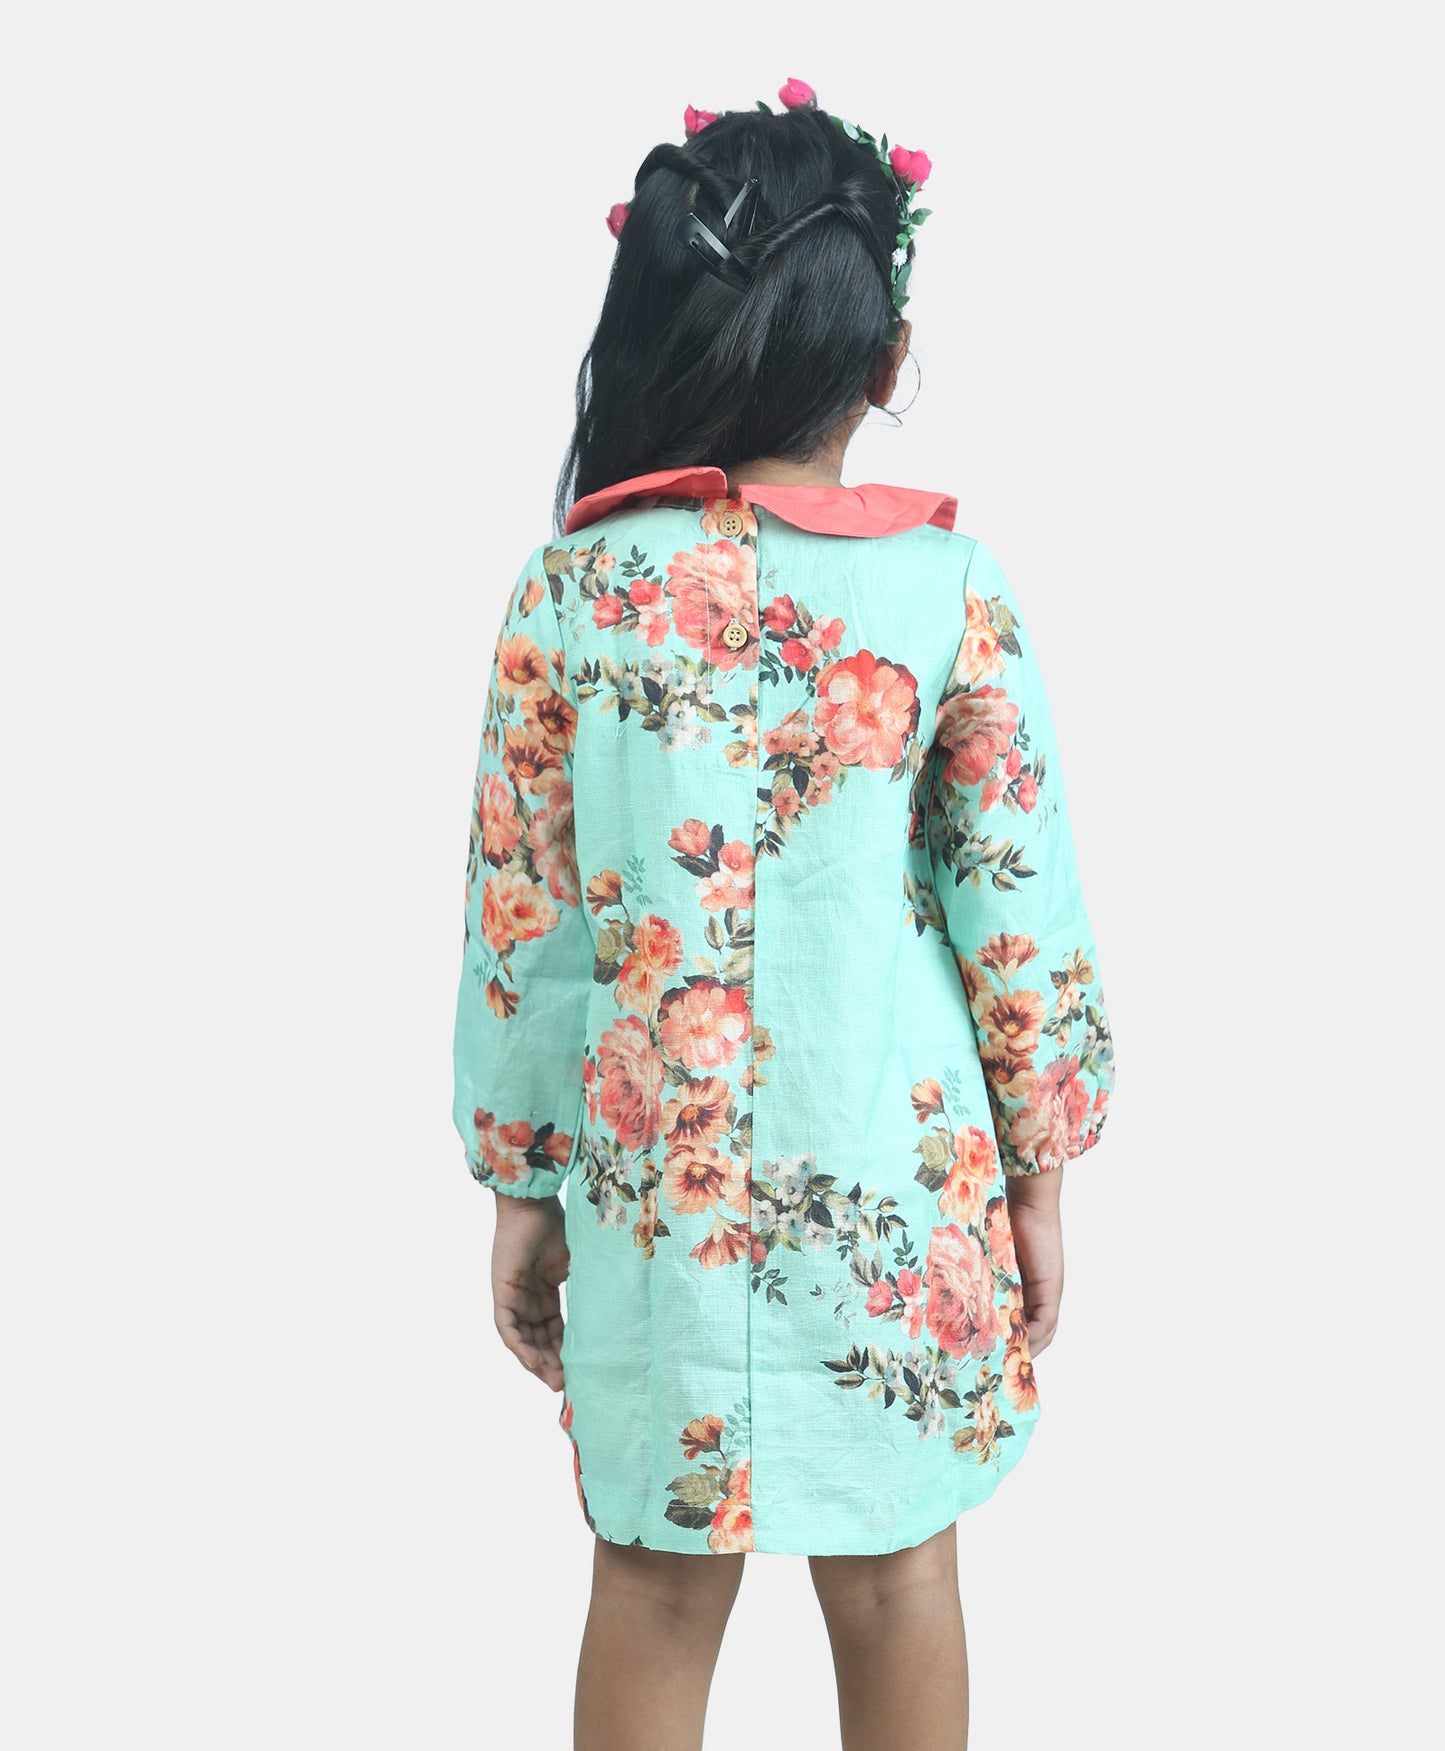 Vintage floral print dress with contrast collar -Green